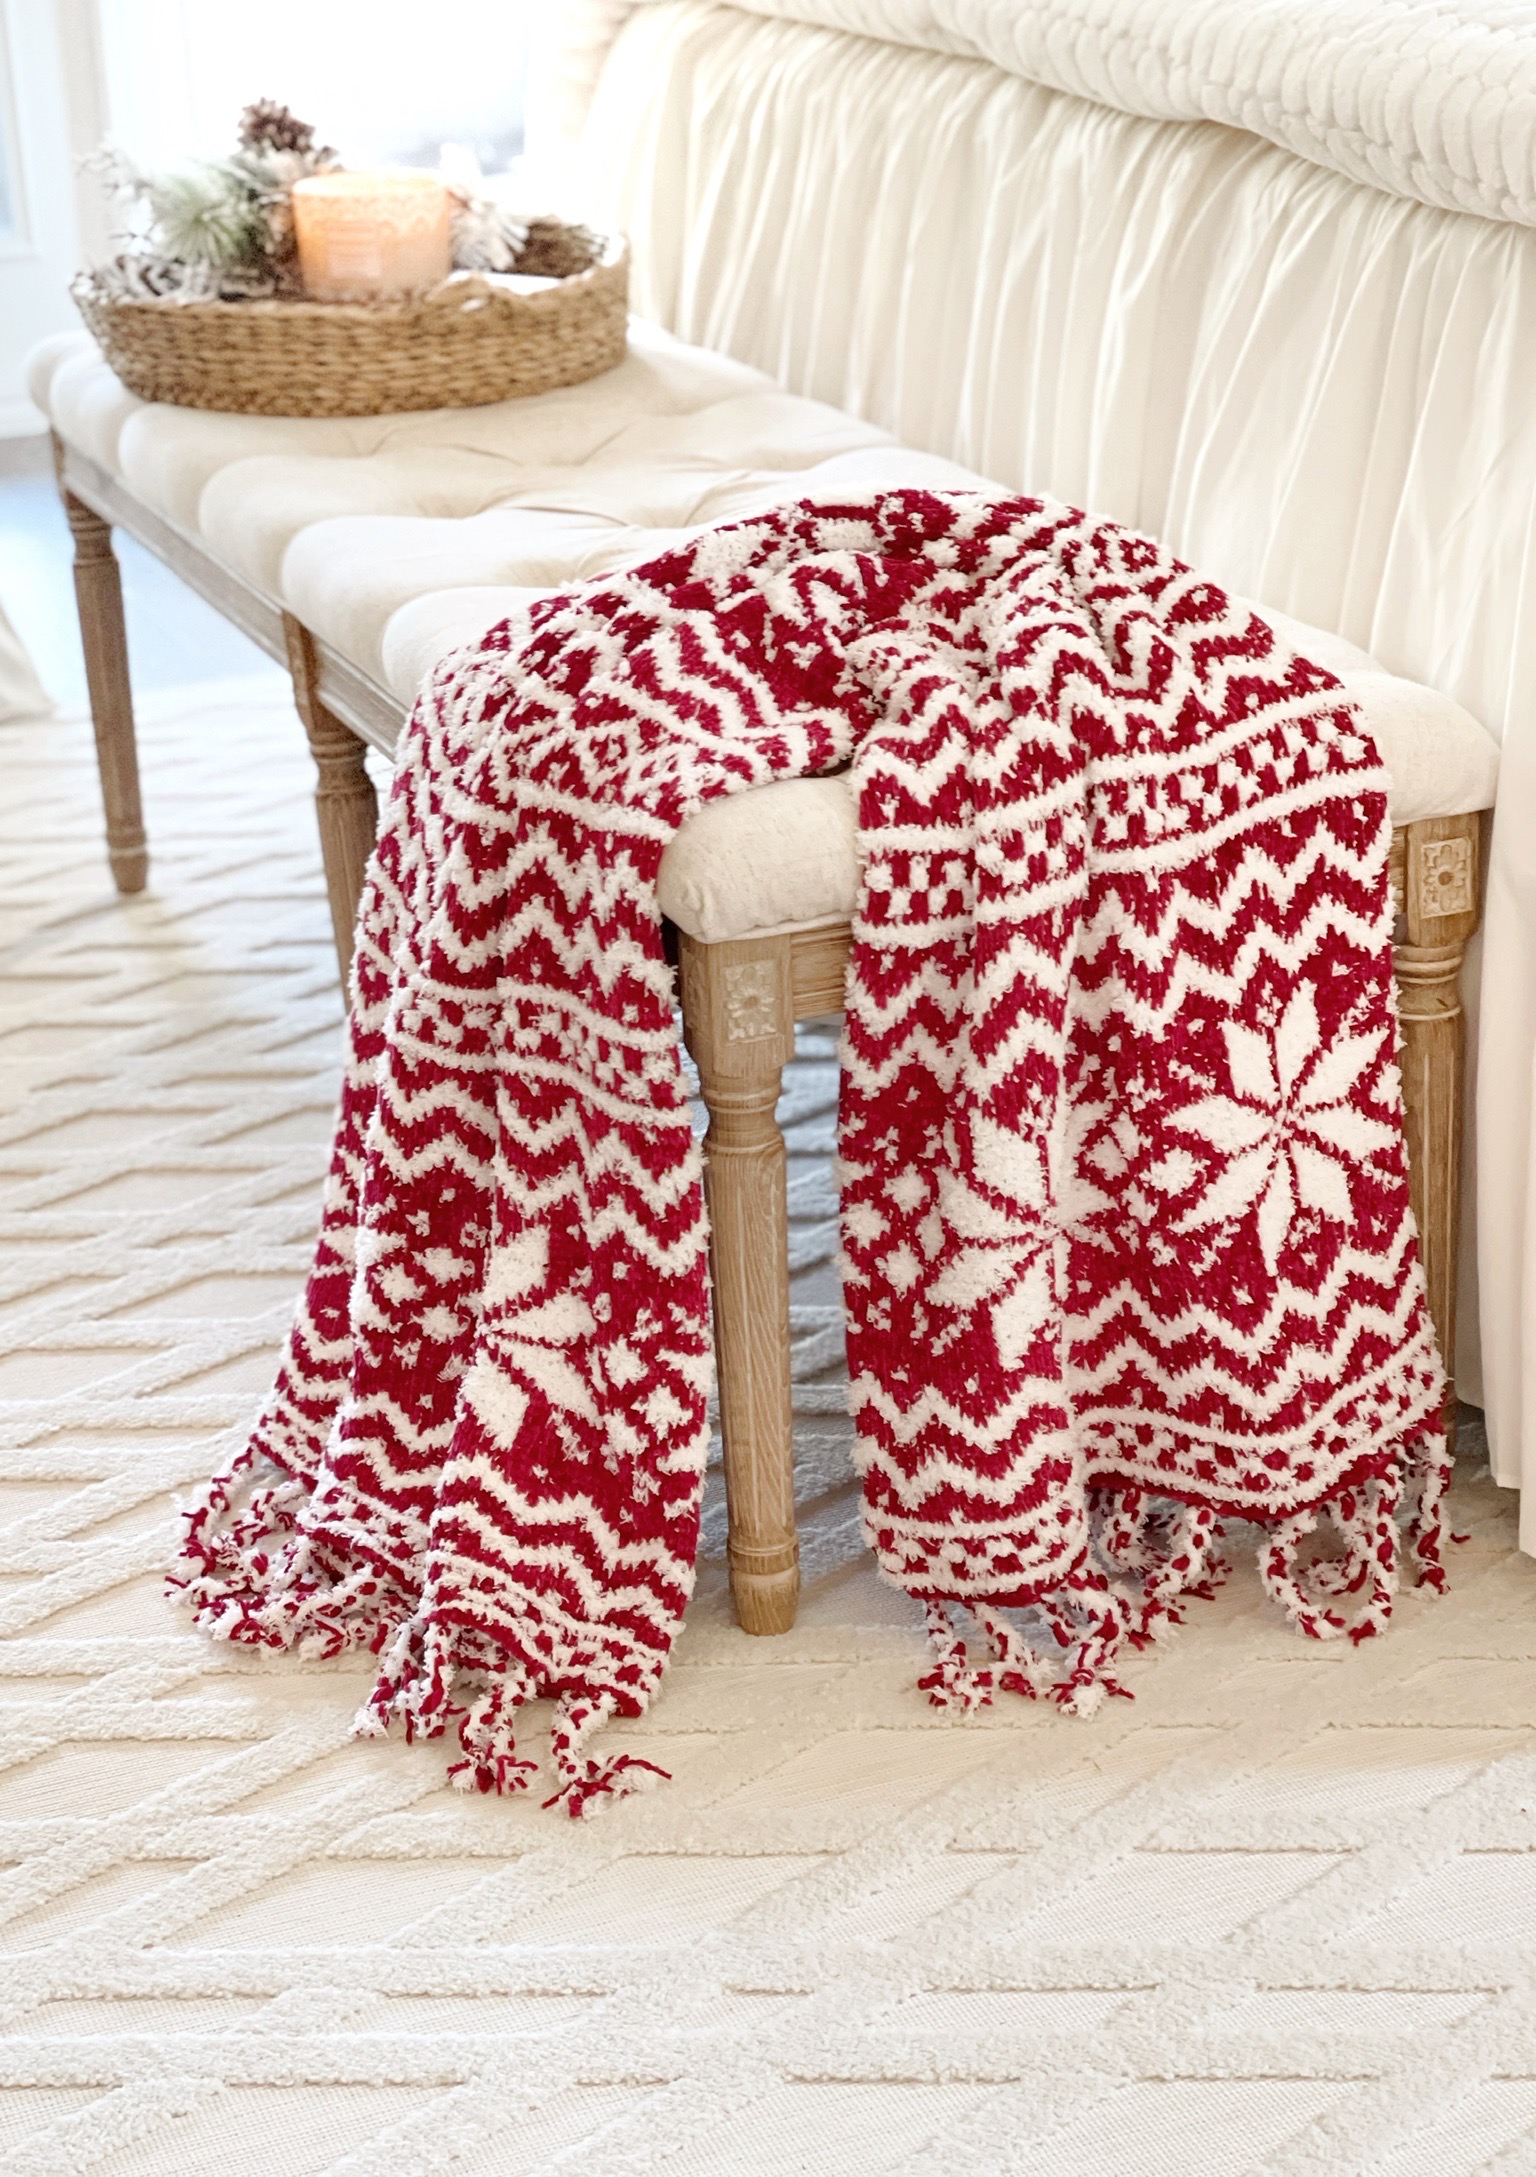 My Texas House Aspen Chenille Throw Blanket, Red, Standard Throw - image 2 of 6